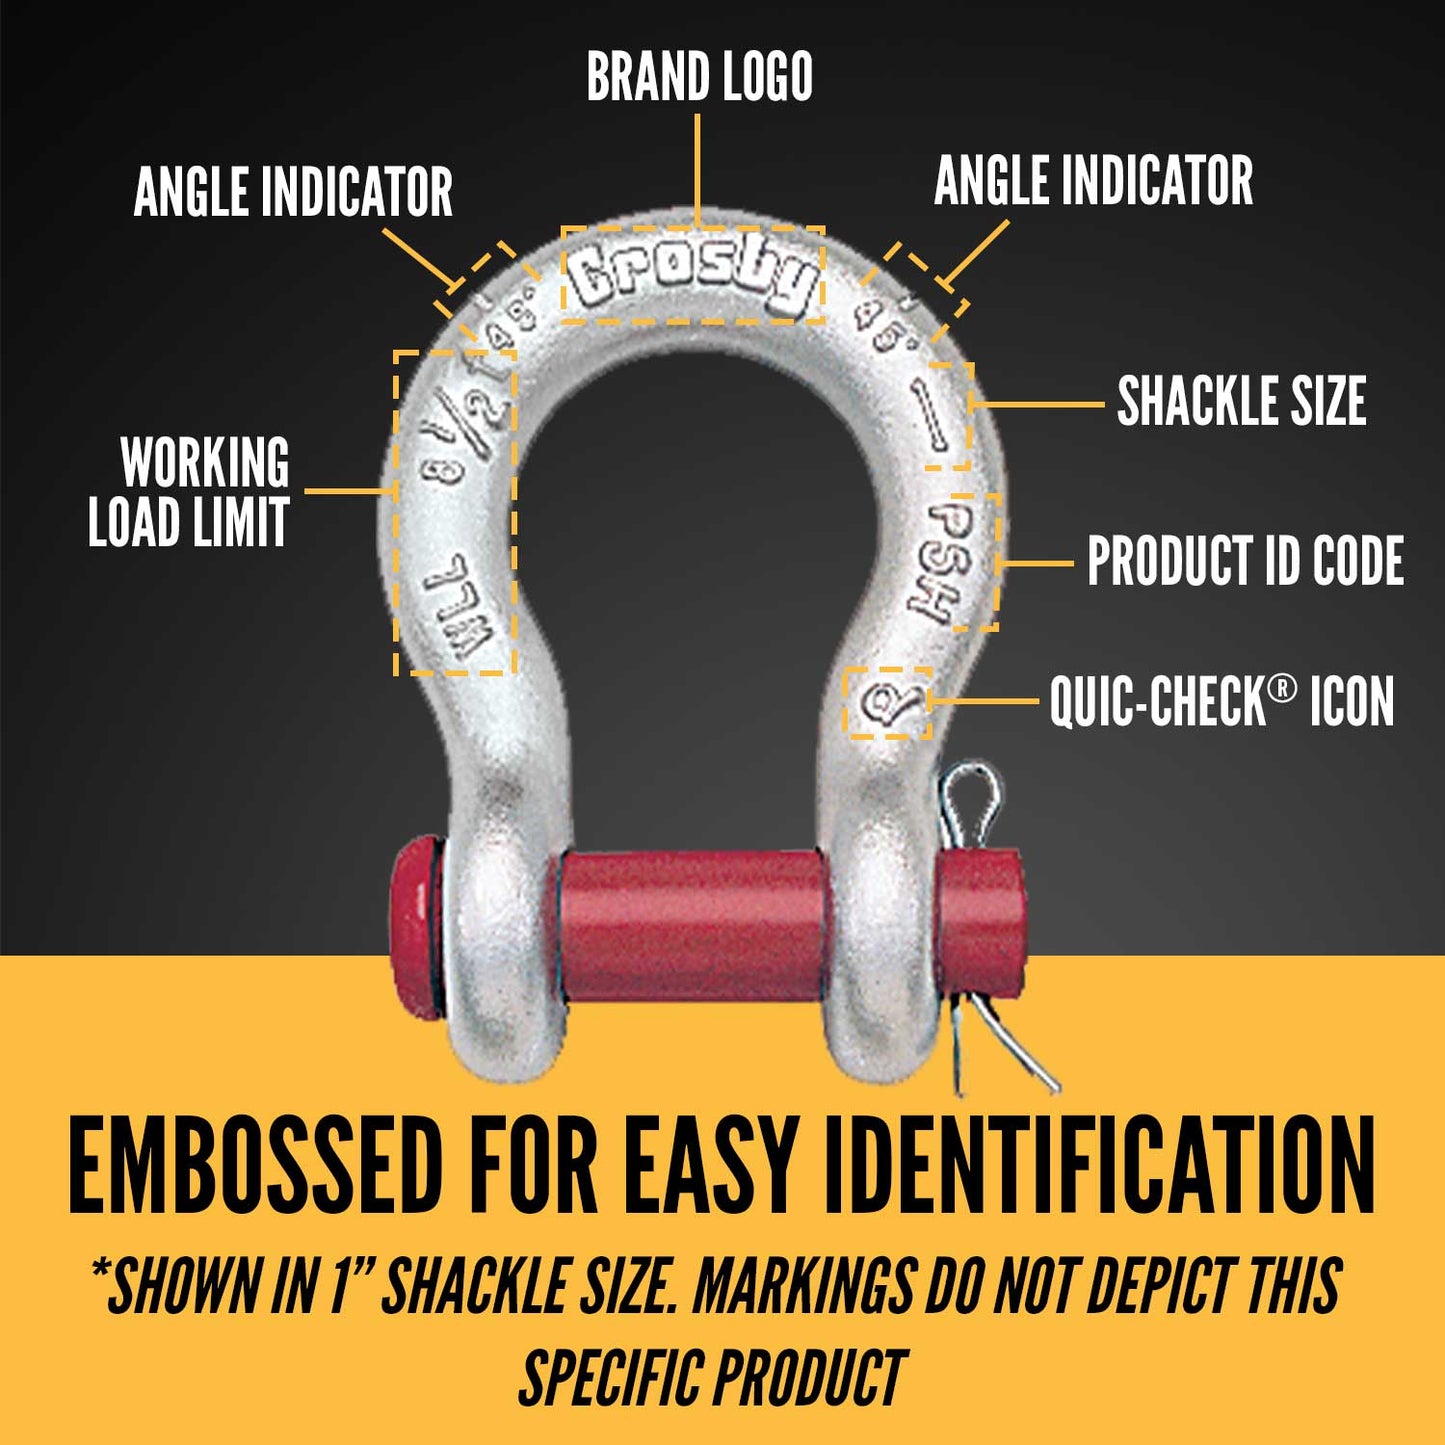 1-1/2" Crosby® Round Pin Anchor Shackle | G-213 - 17 Ton embossed for easy identification